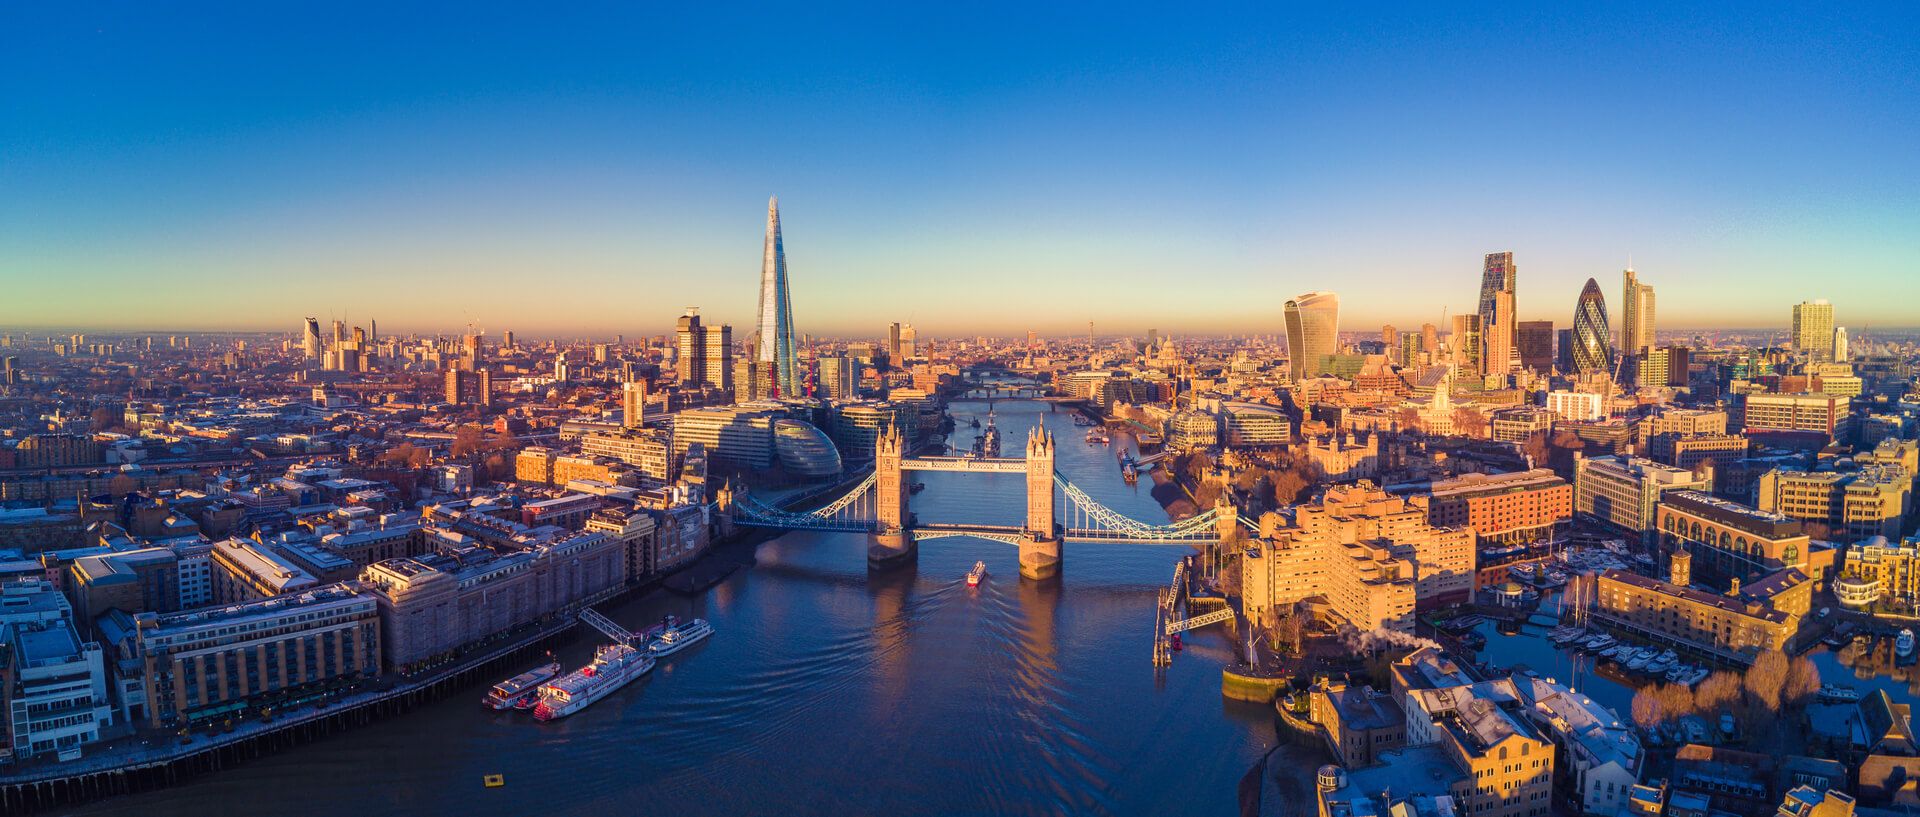 Aerial panoramic cityscape view of London and the River Thames, England, United Kingdom
